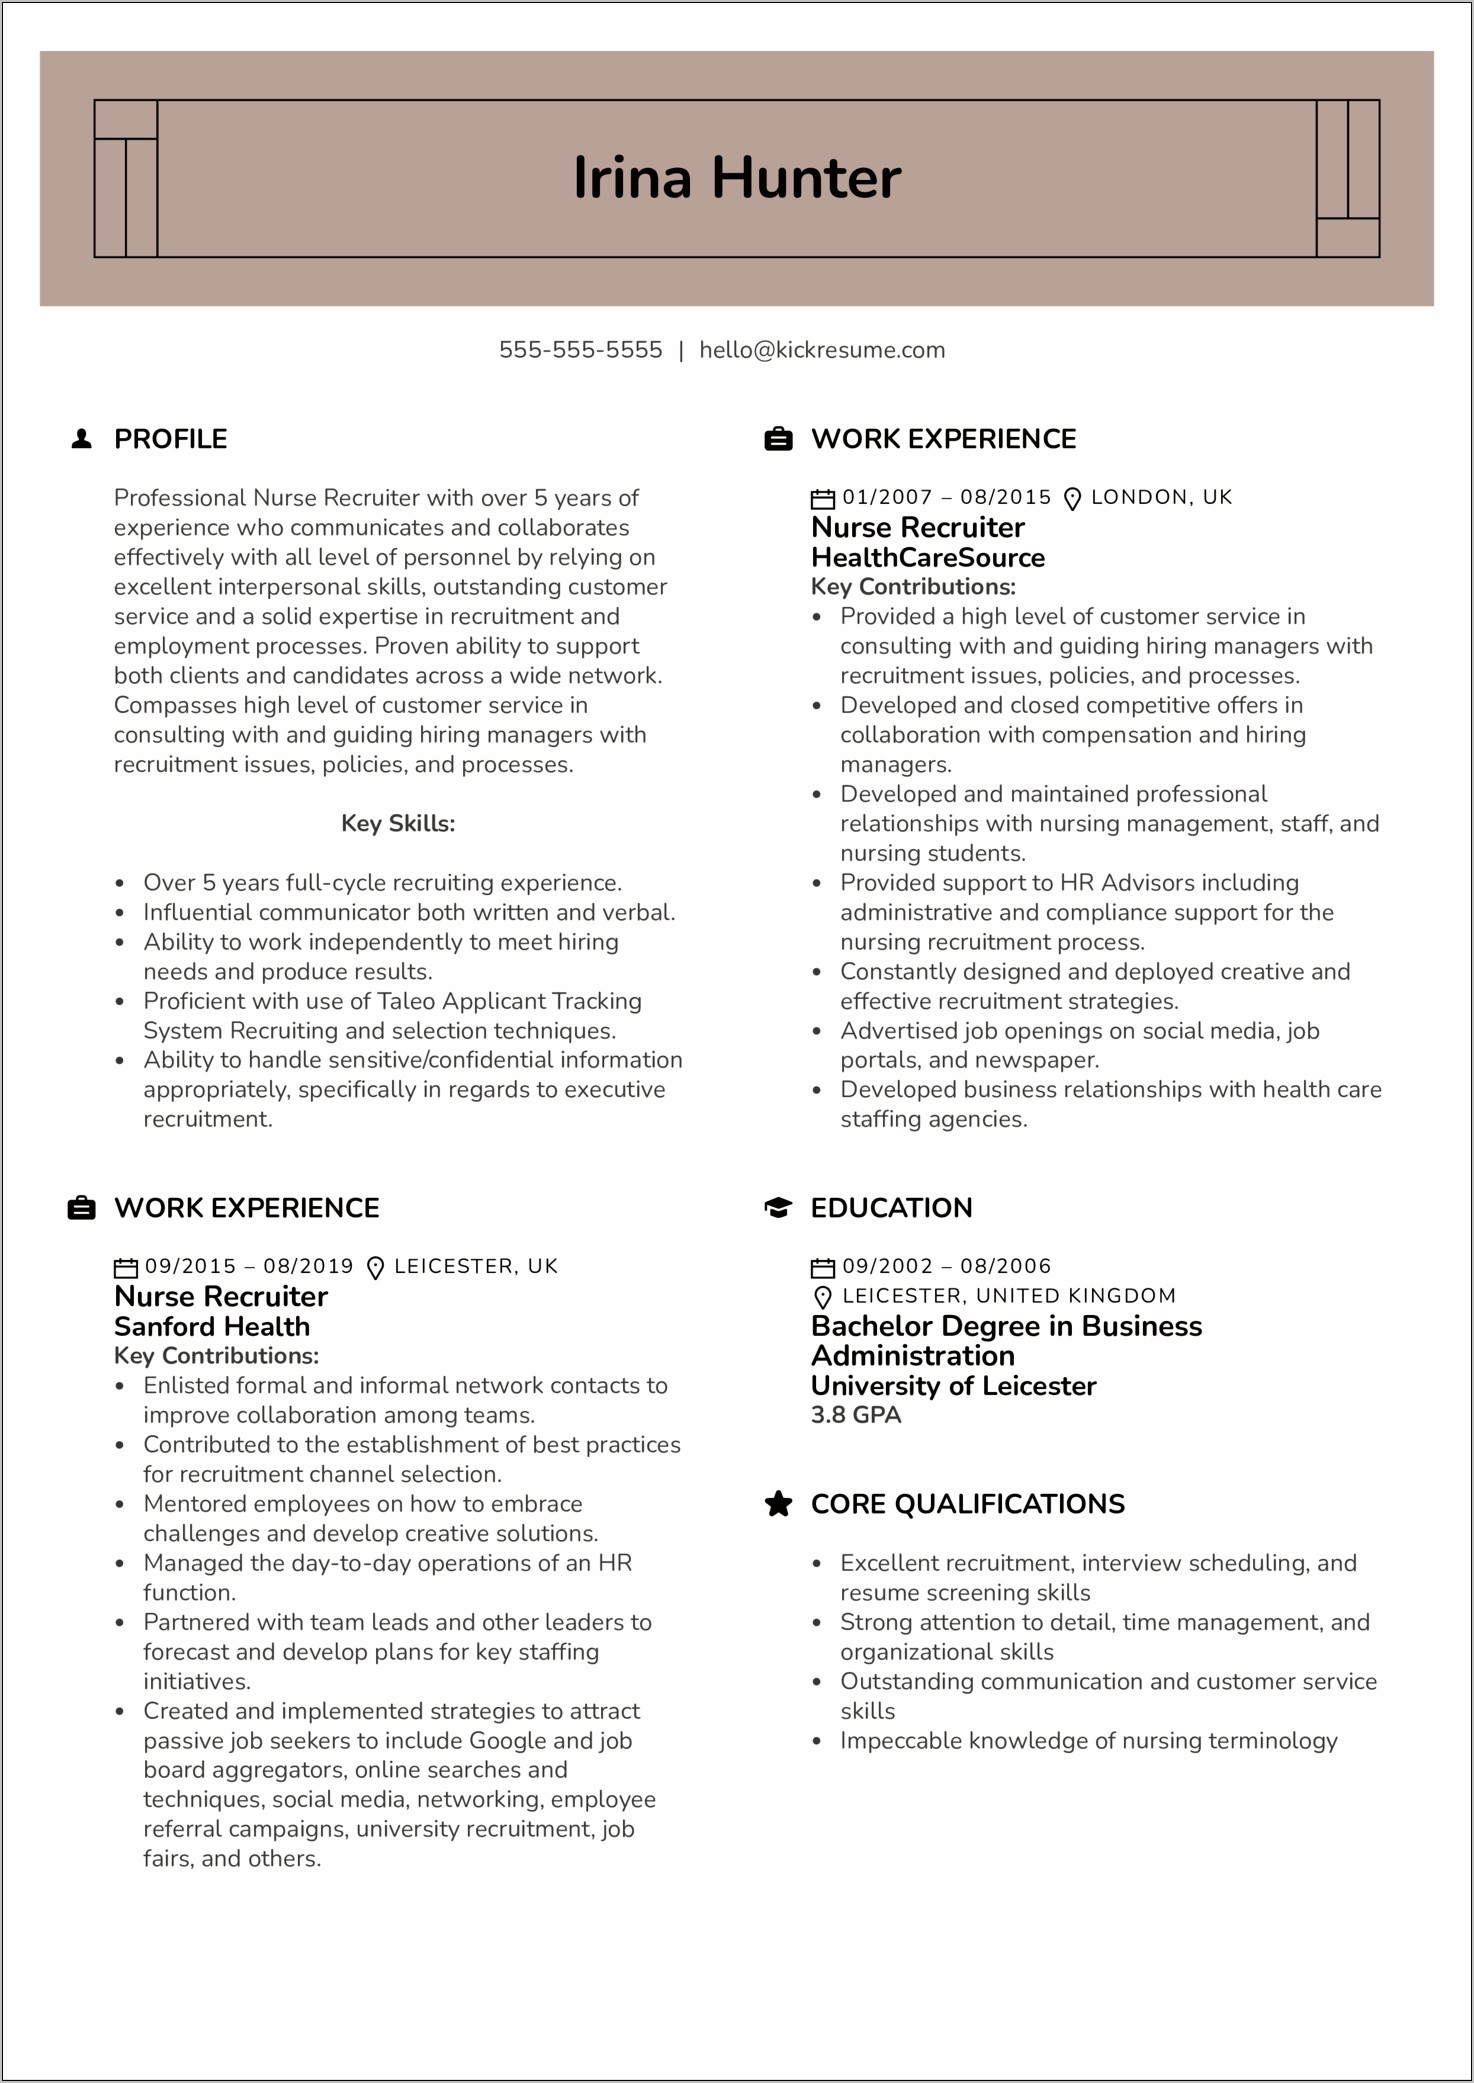 Resume Objective Examples For Recruiters